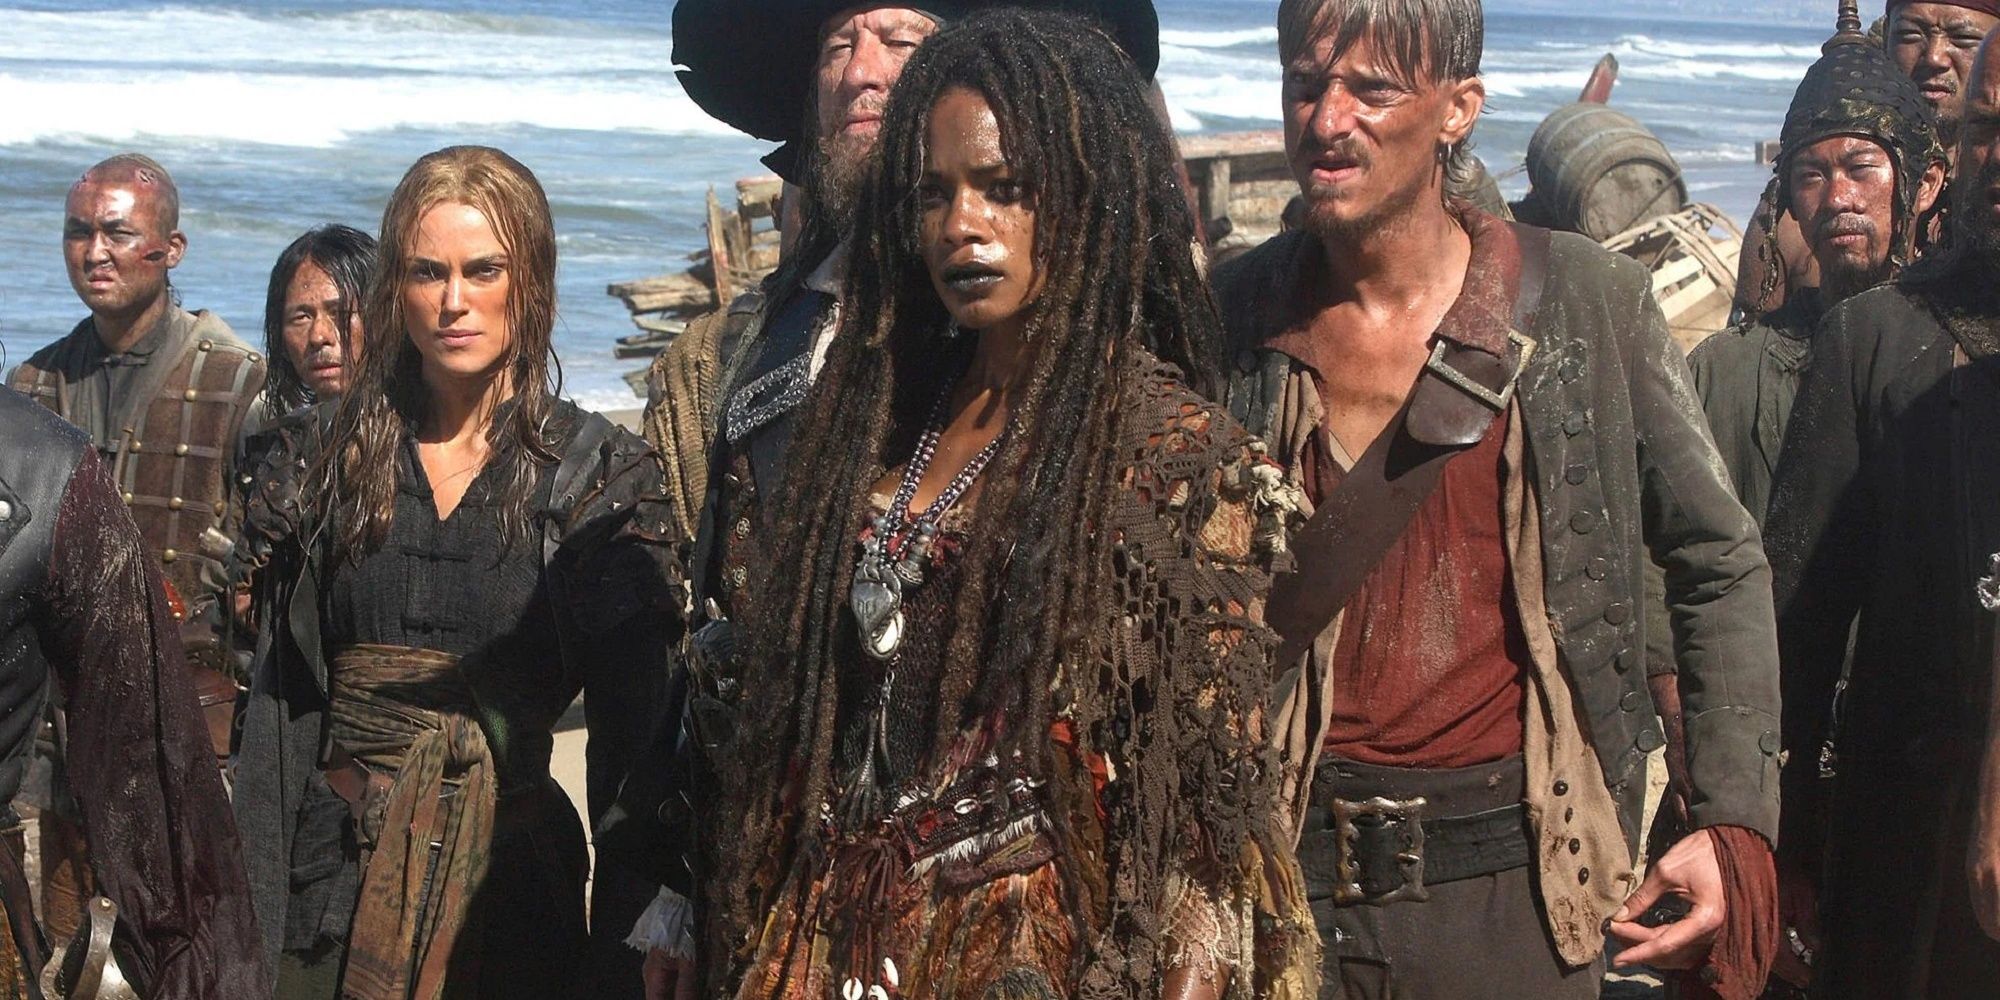 Tia Dalma, Barbossa, and Elizabeth Swann in Pirates of the Carribean: At World's End.